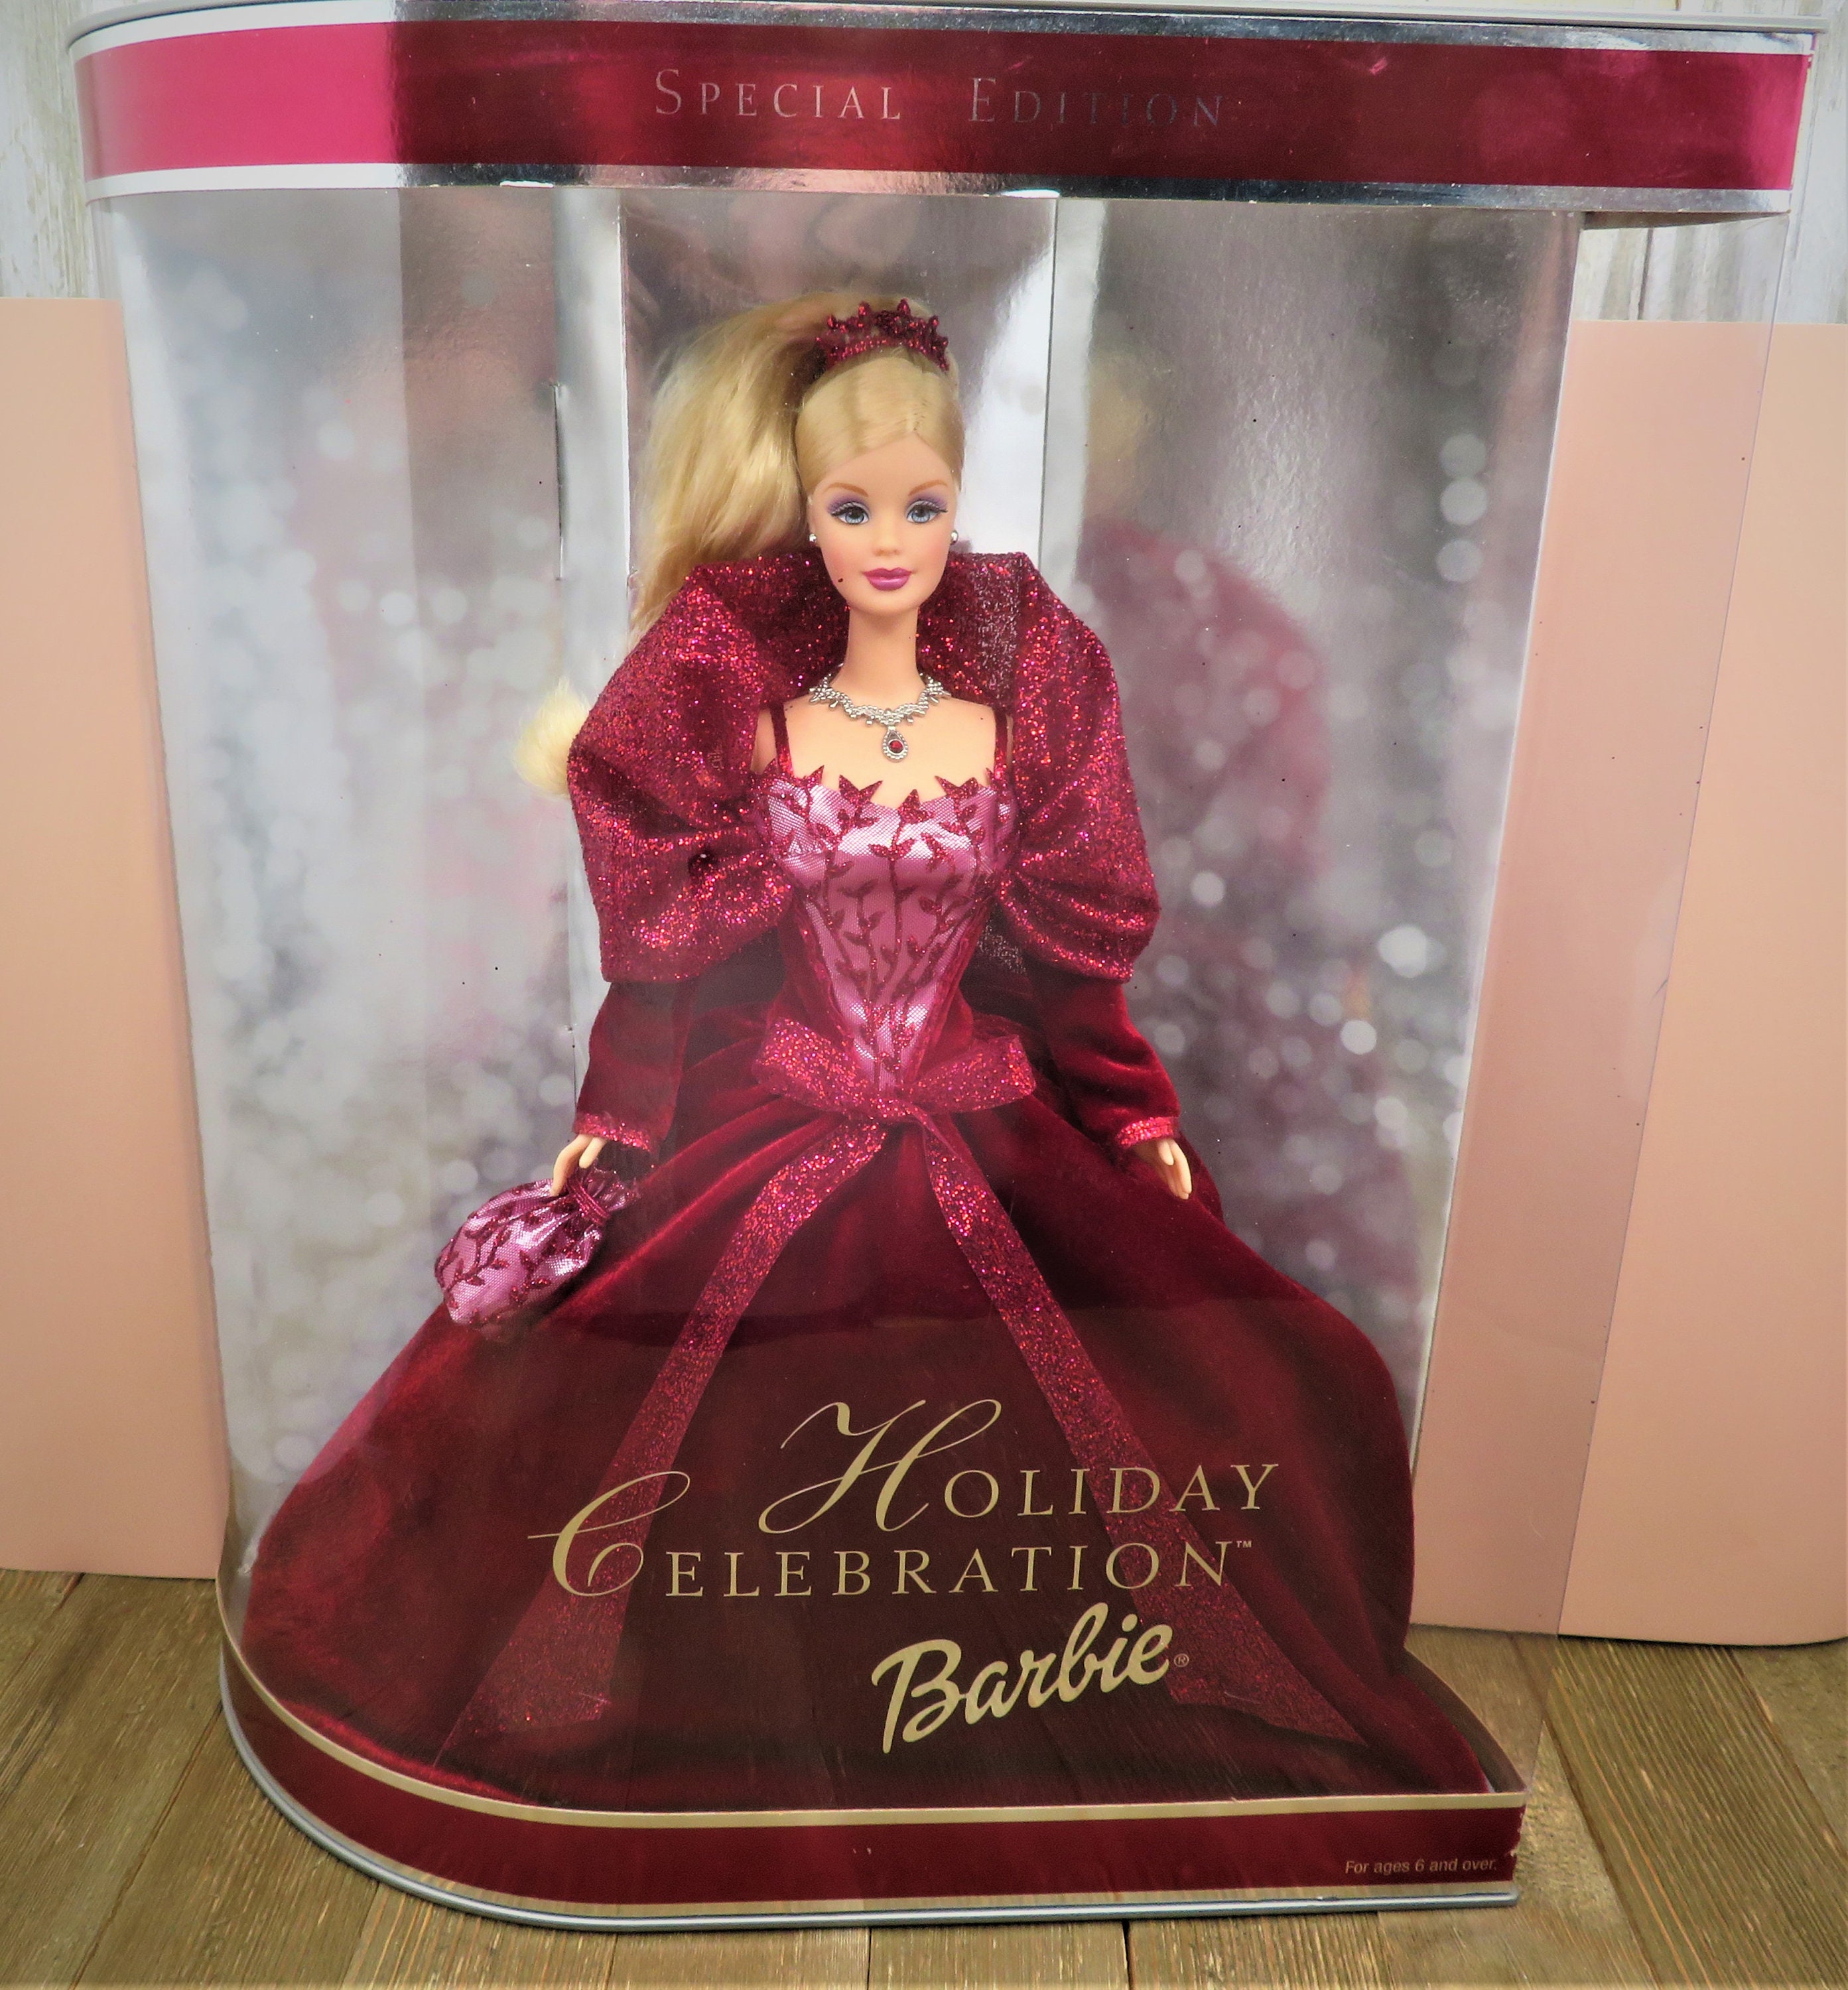 Zeeanemoon Toelating Buitenshuis 2002 Holiday Celebration Barbie Collectible Doll in Original - Etsy